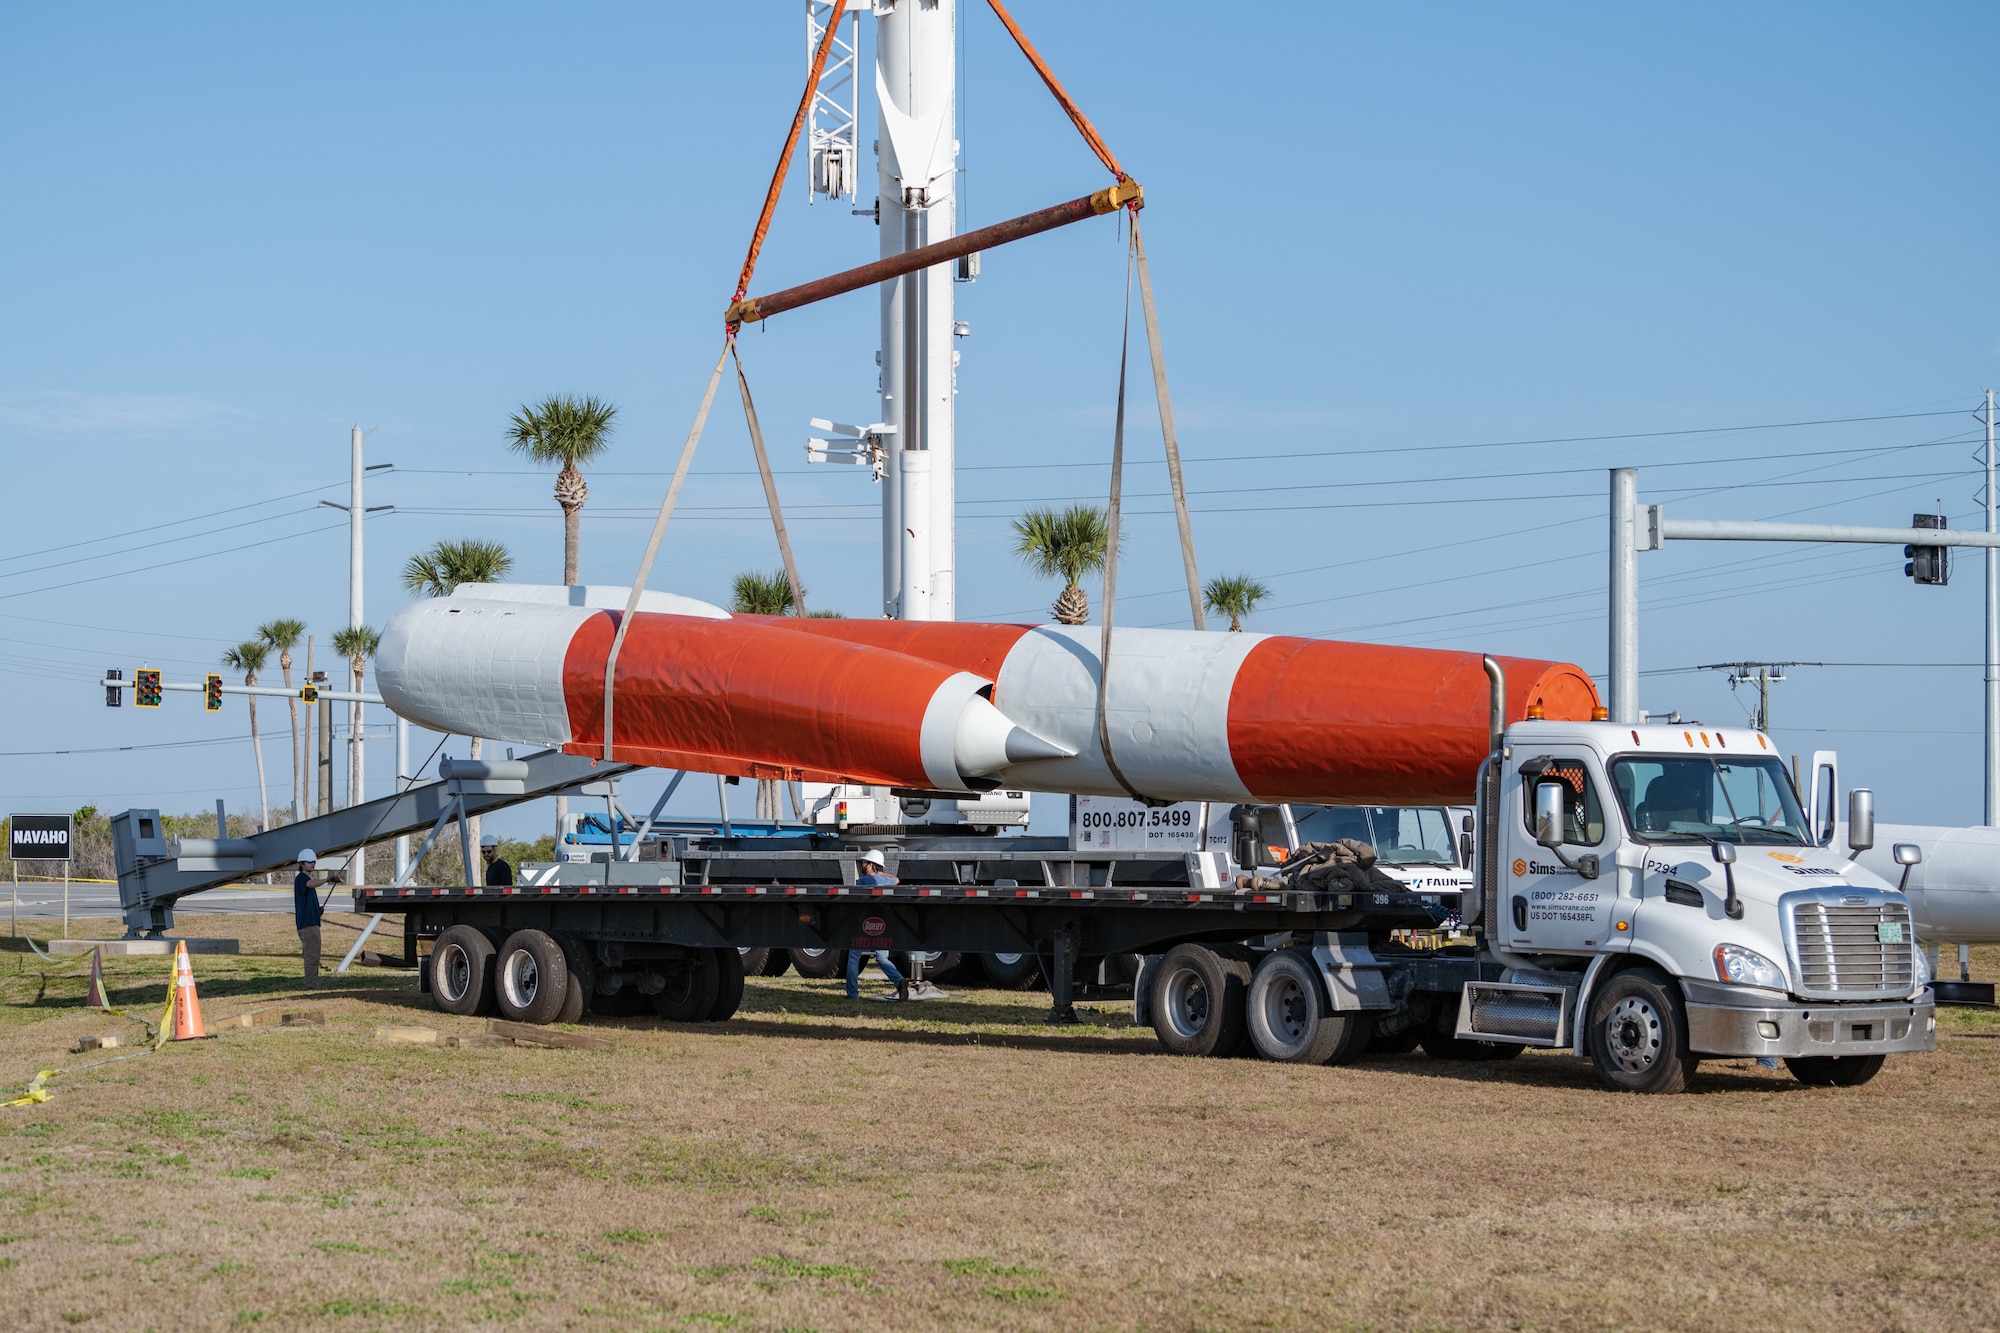 A restored Navaho XSM-64 Missle is put on display at Cape Canaveral Space Force Station, Fla., March 27, 2021. Considered the most advanced aircraft in its day, the Navaho was envisioned in 1947 as a pilotless bomber capable of carrying a weapons payload a distance of 5,500 miles. (U.S. Space Force photo by Joshua Conti)